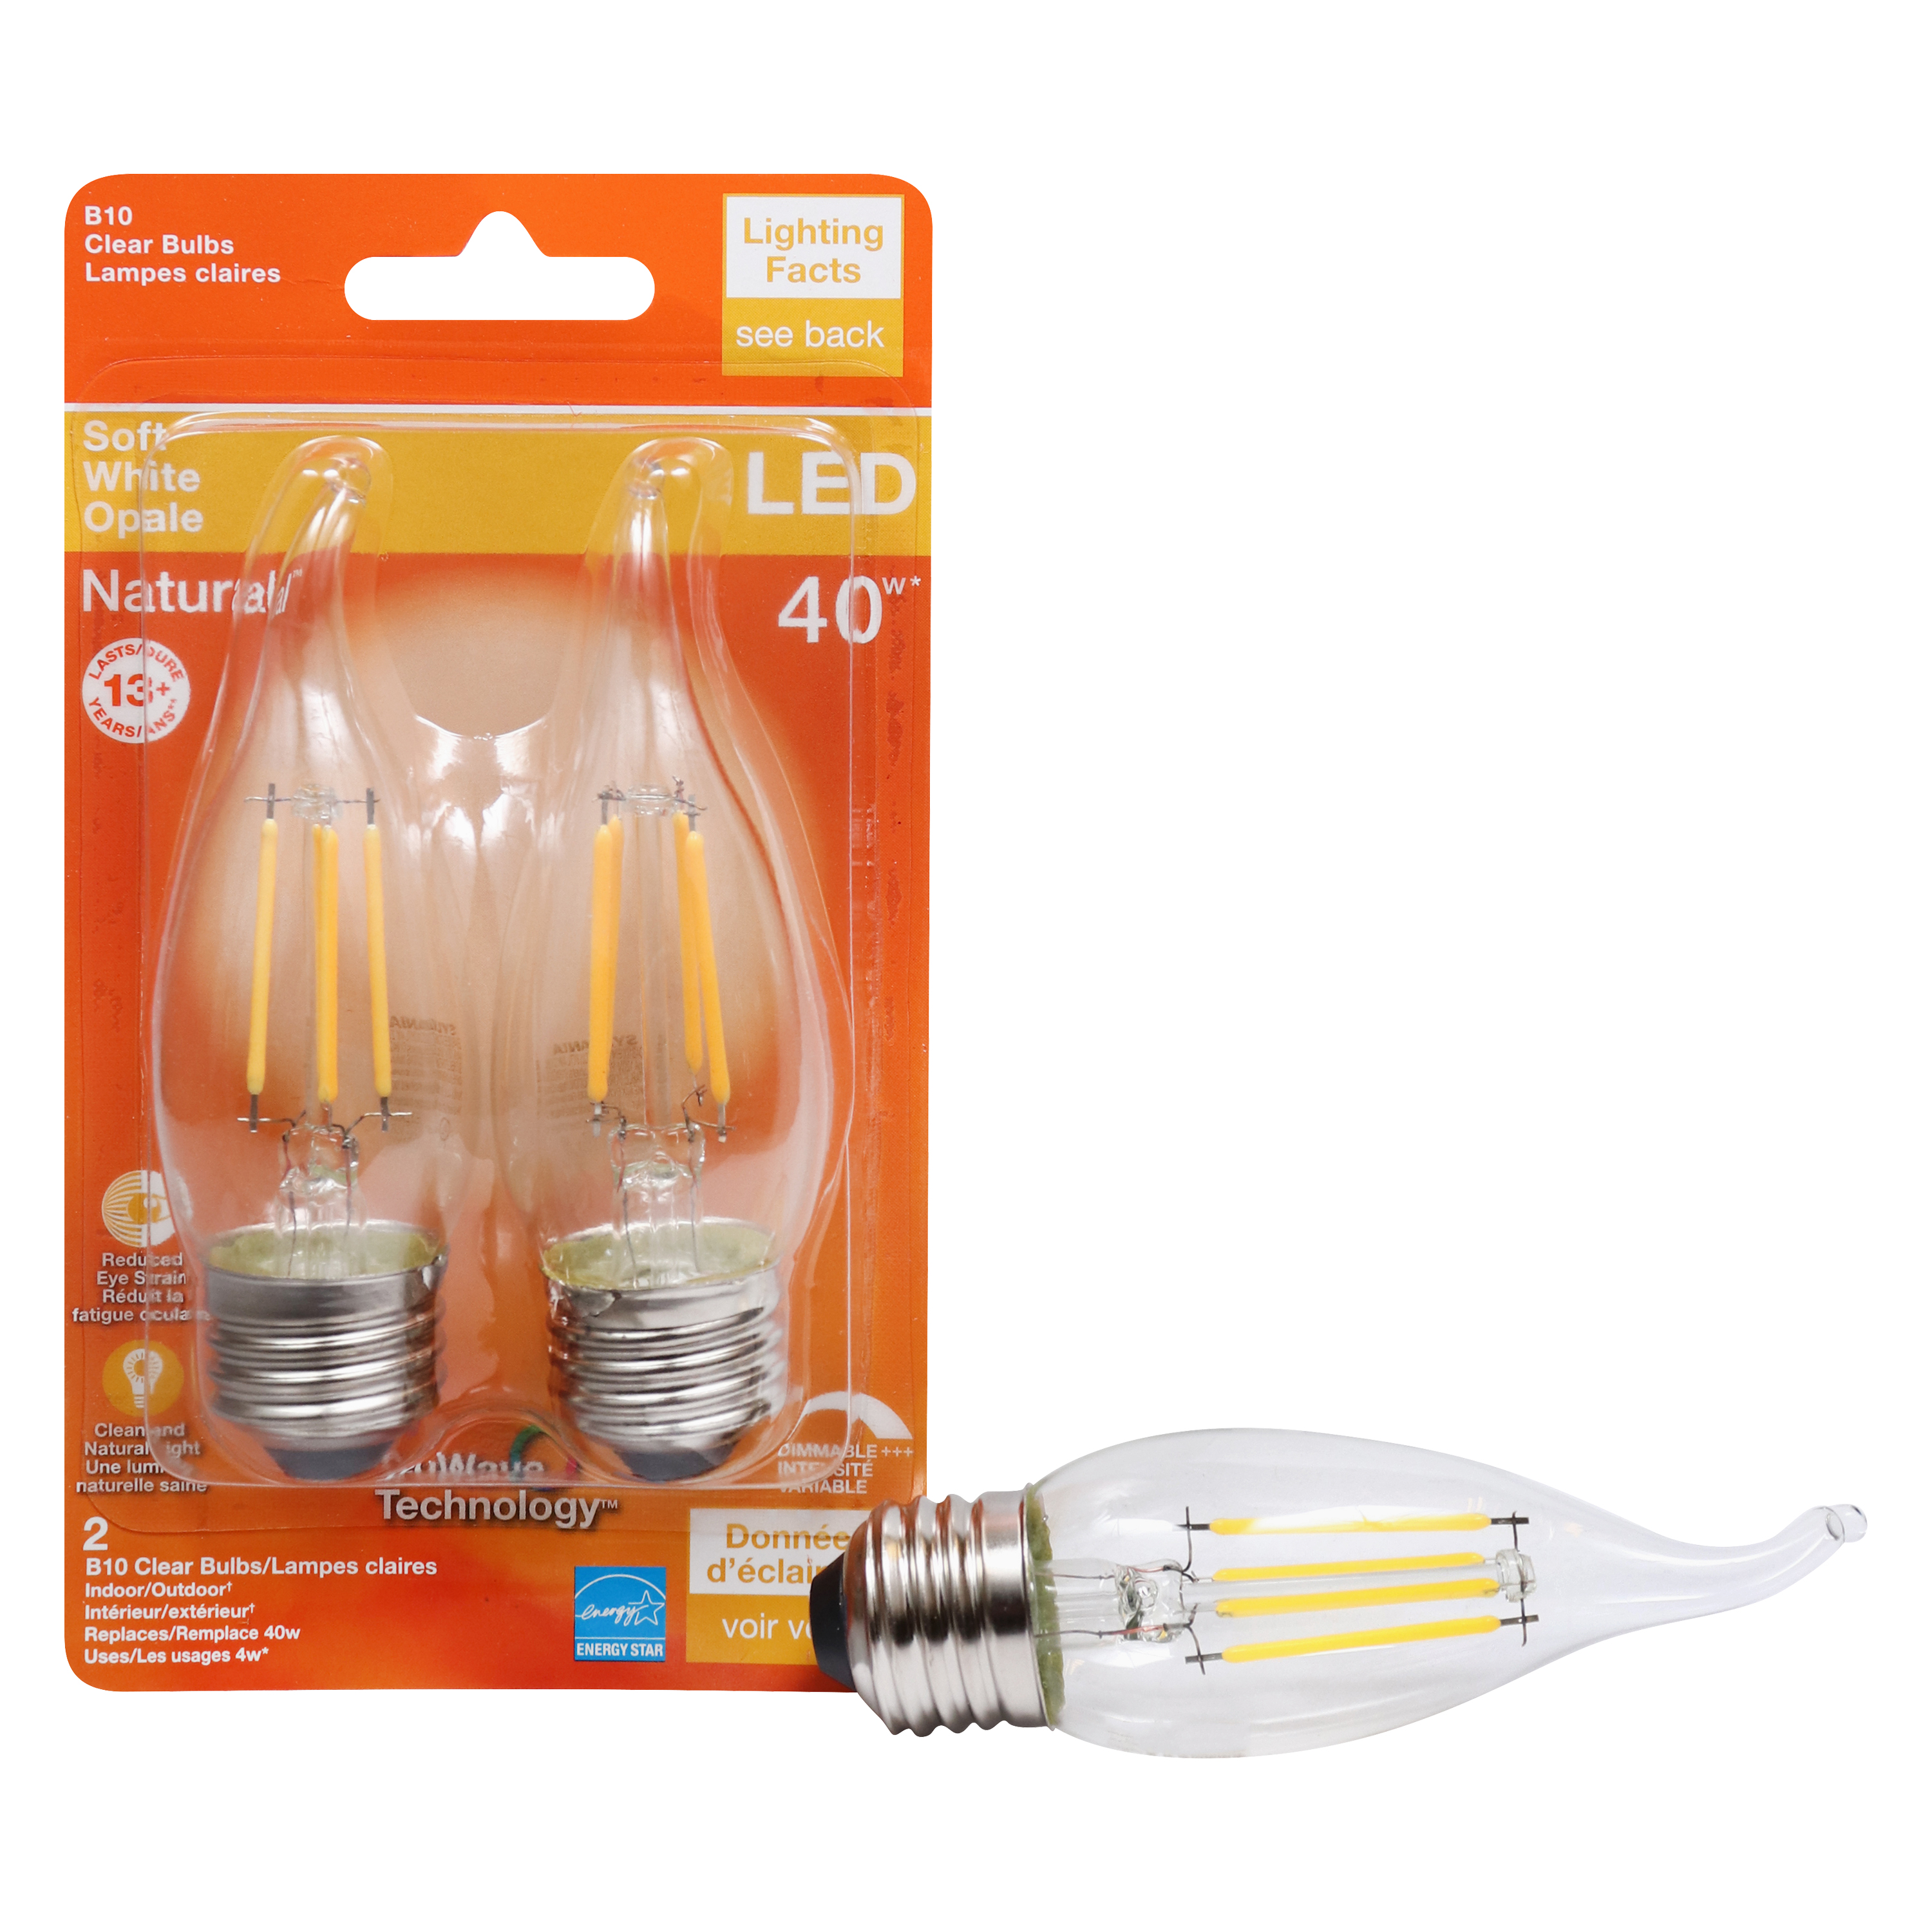 40756 Natural LED Bulb, Decorative, B10 Bent Tip Lamp, 40 W Equivalent, E26 Lamp Base, Dimmable, Clear